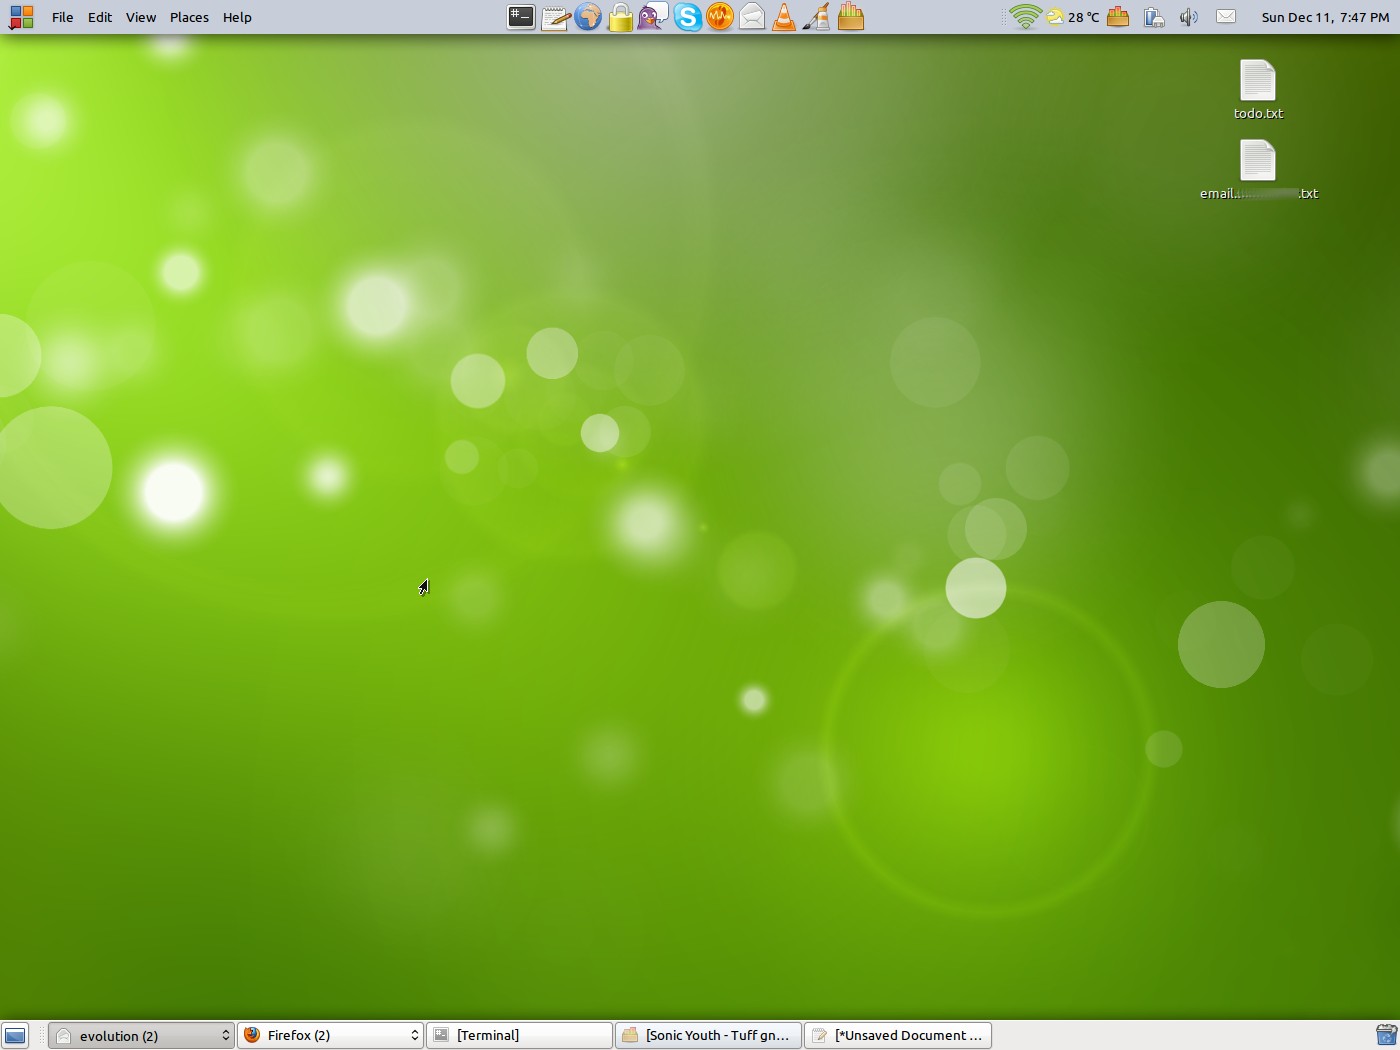 ... GTK, and of course, the Linux Mint wallpaper from yesterday's tests